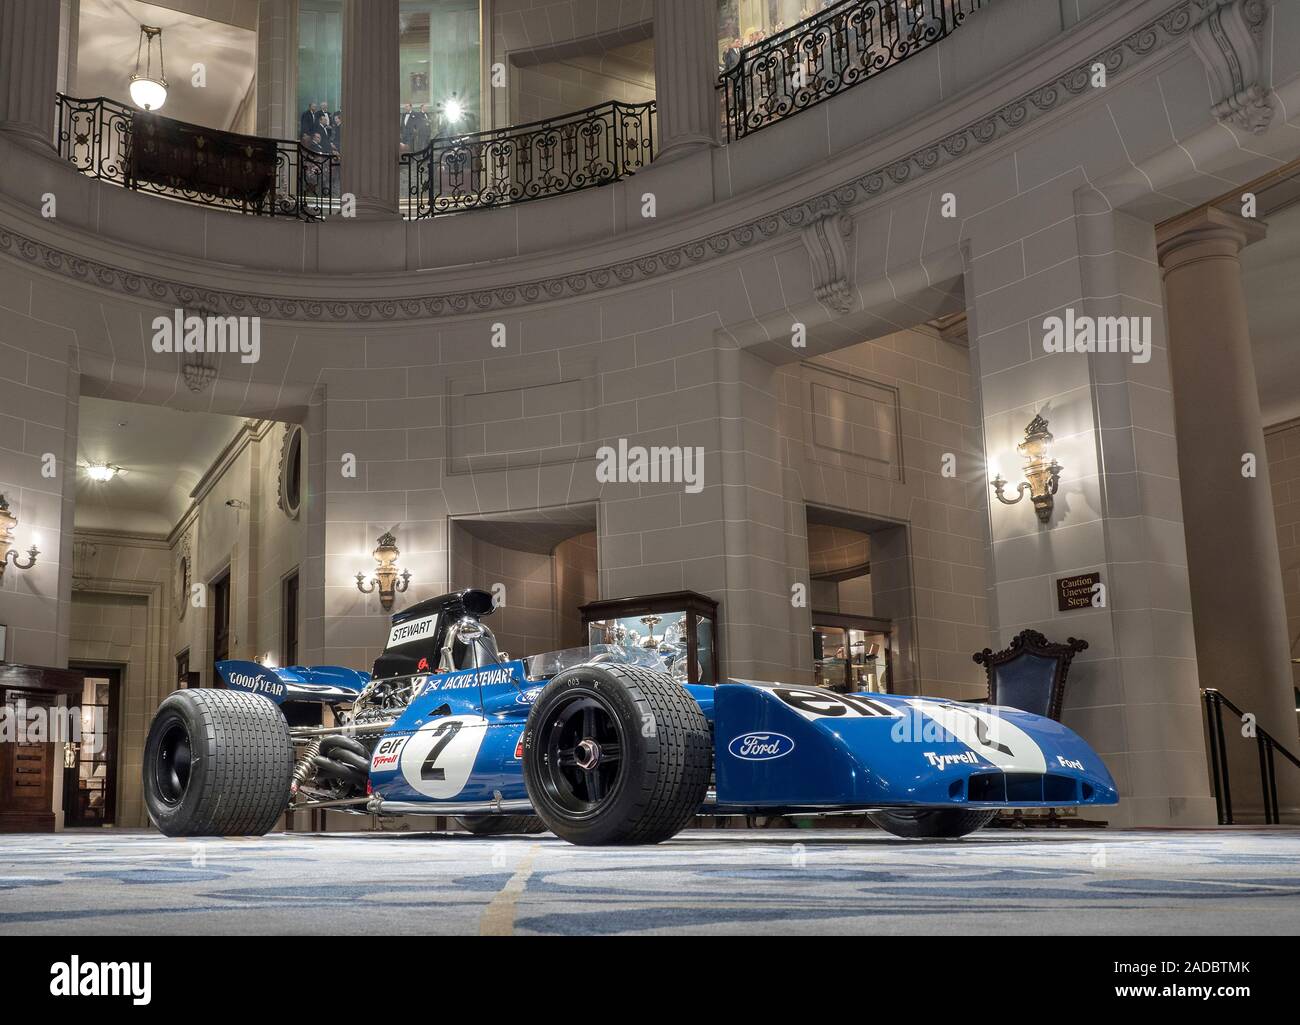 1971 Tyrrell 003  driven by Jackie Steward on display in the Royal Automobile Club Pall Mall London UK Stock Photo